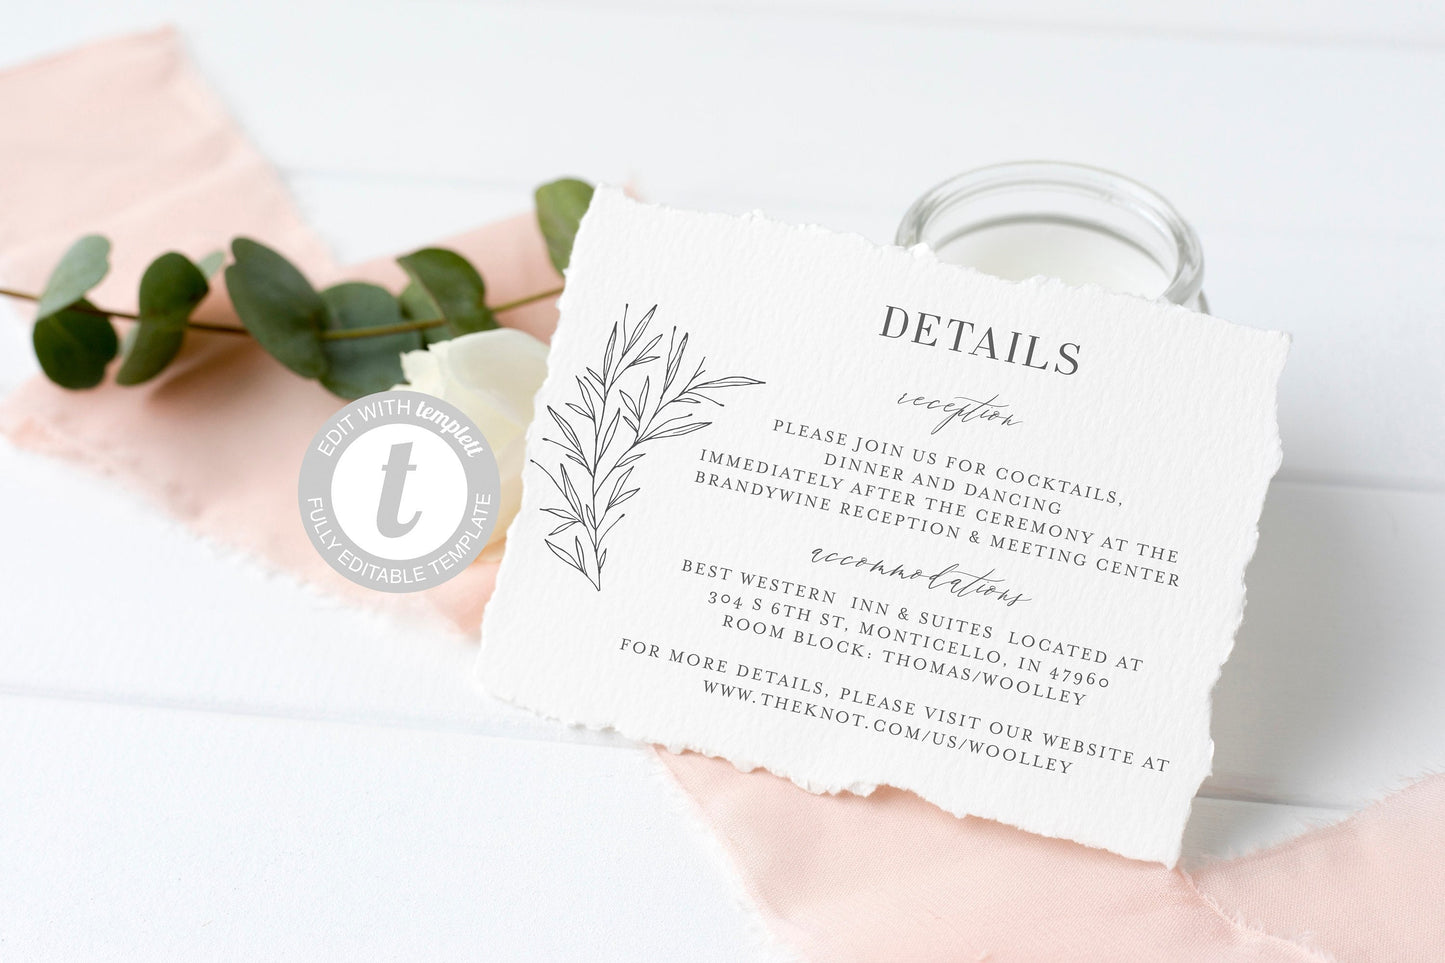 Wedding Details Card Template, Instant Download, Information Card, Wedding Info Card, Rustic Wedding,Details Template  - Olivia RSVP & DETAILS CARDS SAVVY PAPER CO